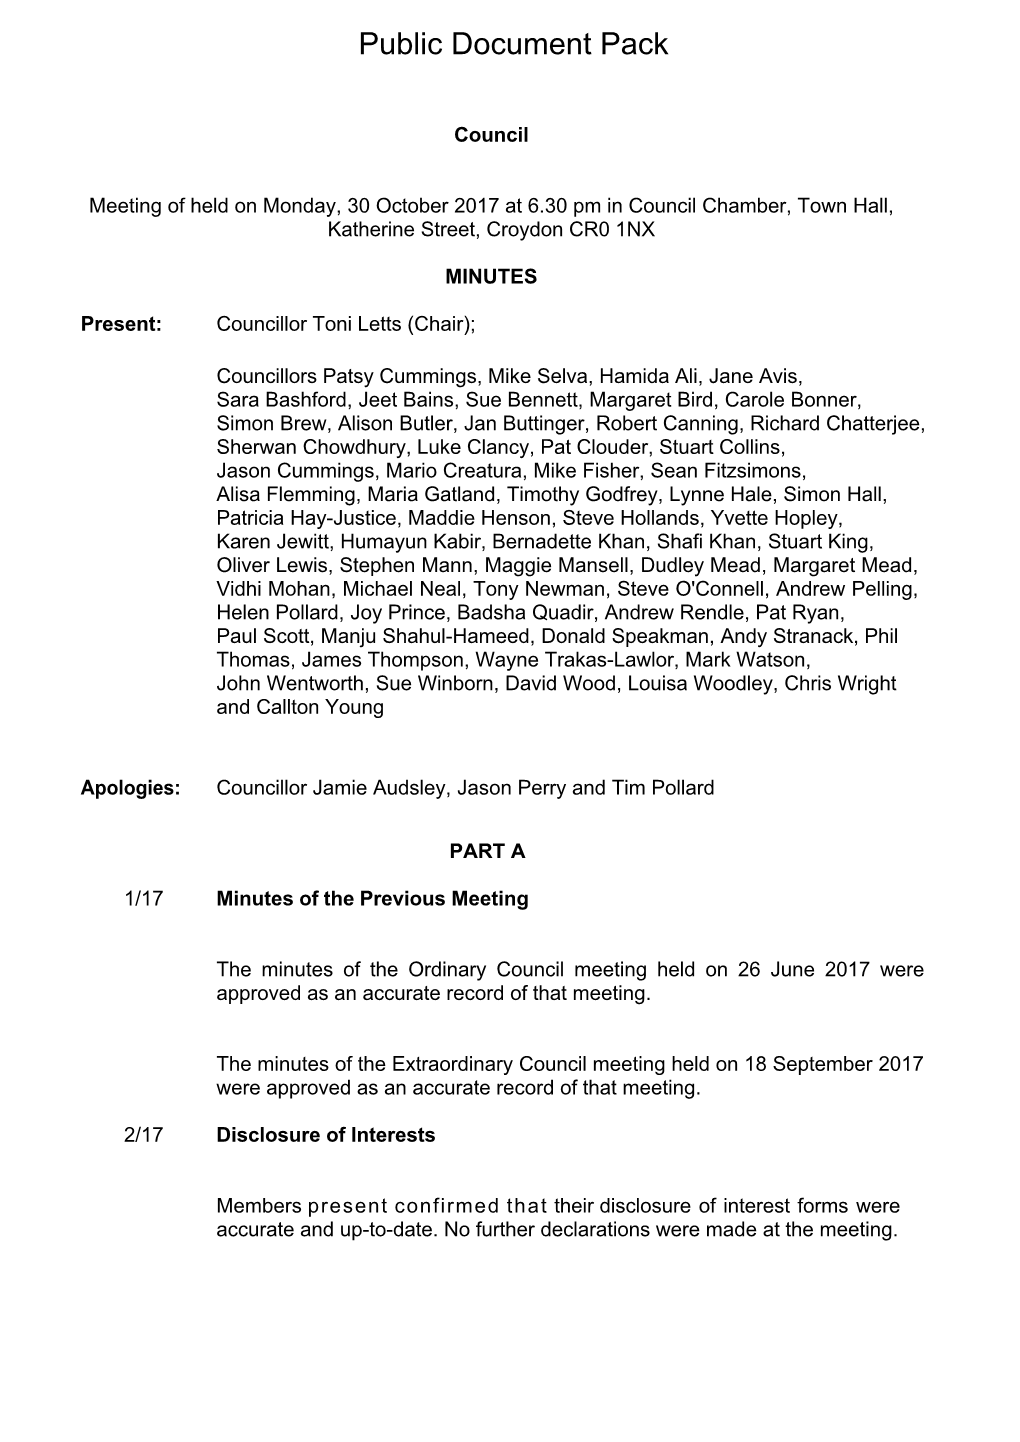 Minutes Document for Council, 30/10